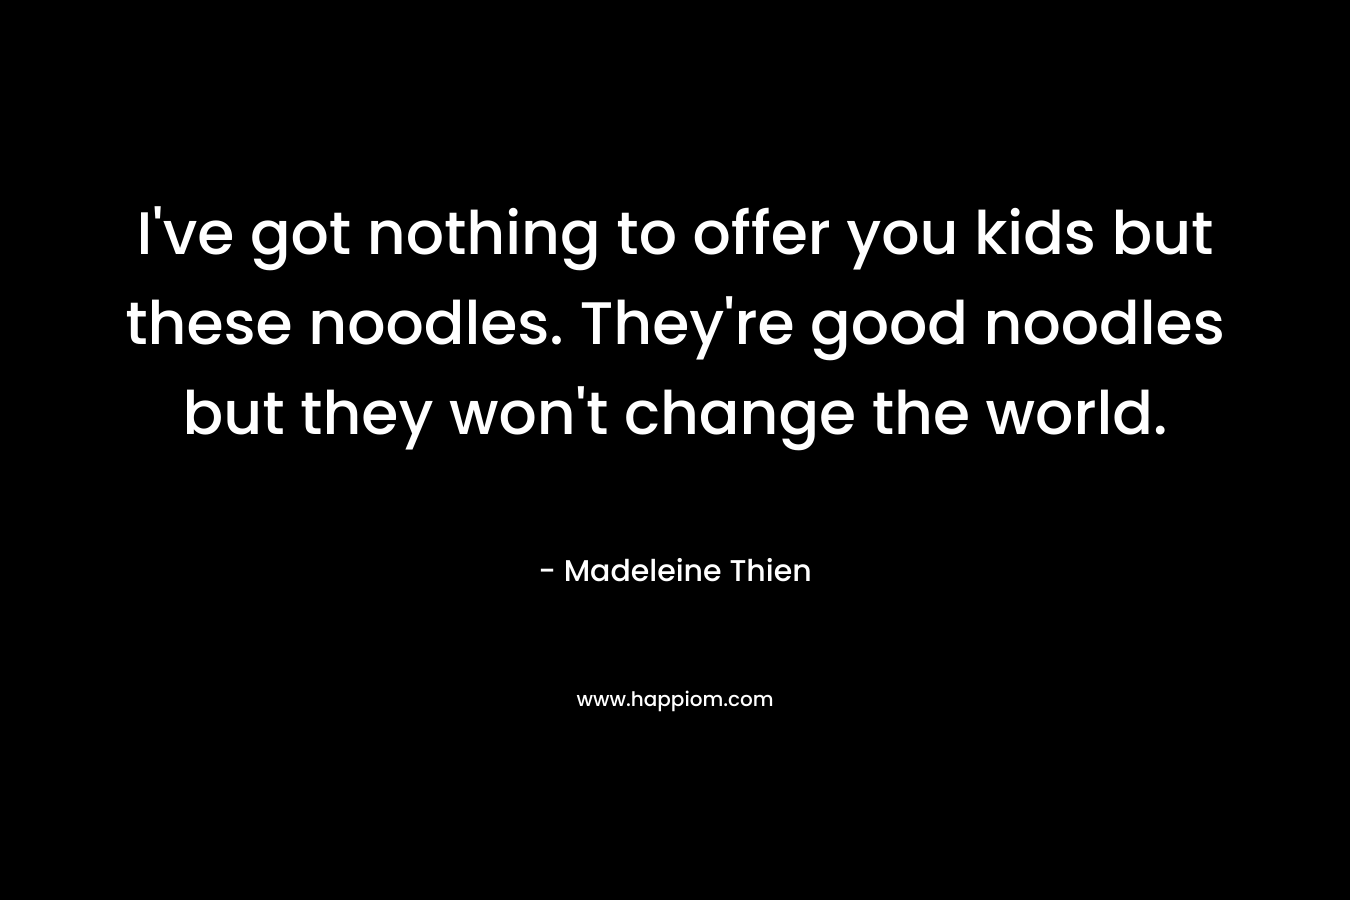 I’ve got nothing to offer you kids but these noodles. They’re good noodles but they won’t change the world. – Madeleine Thien